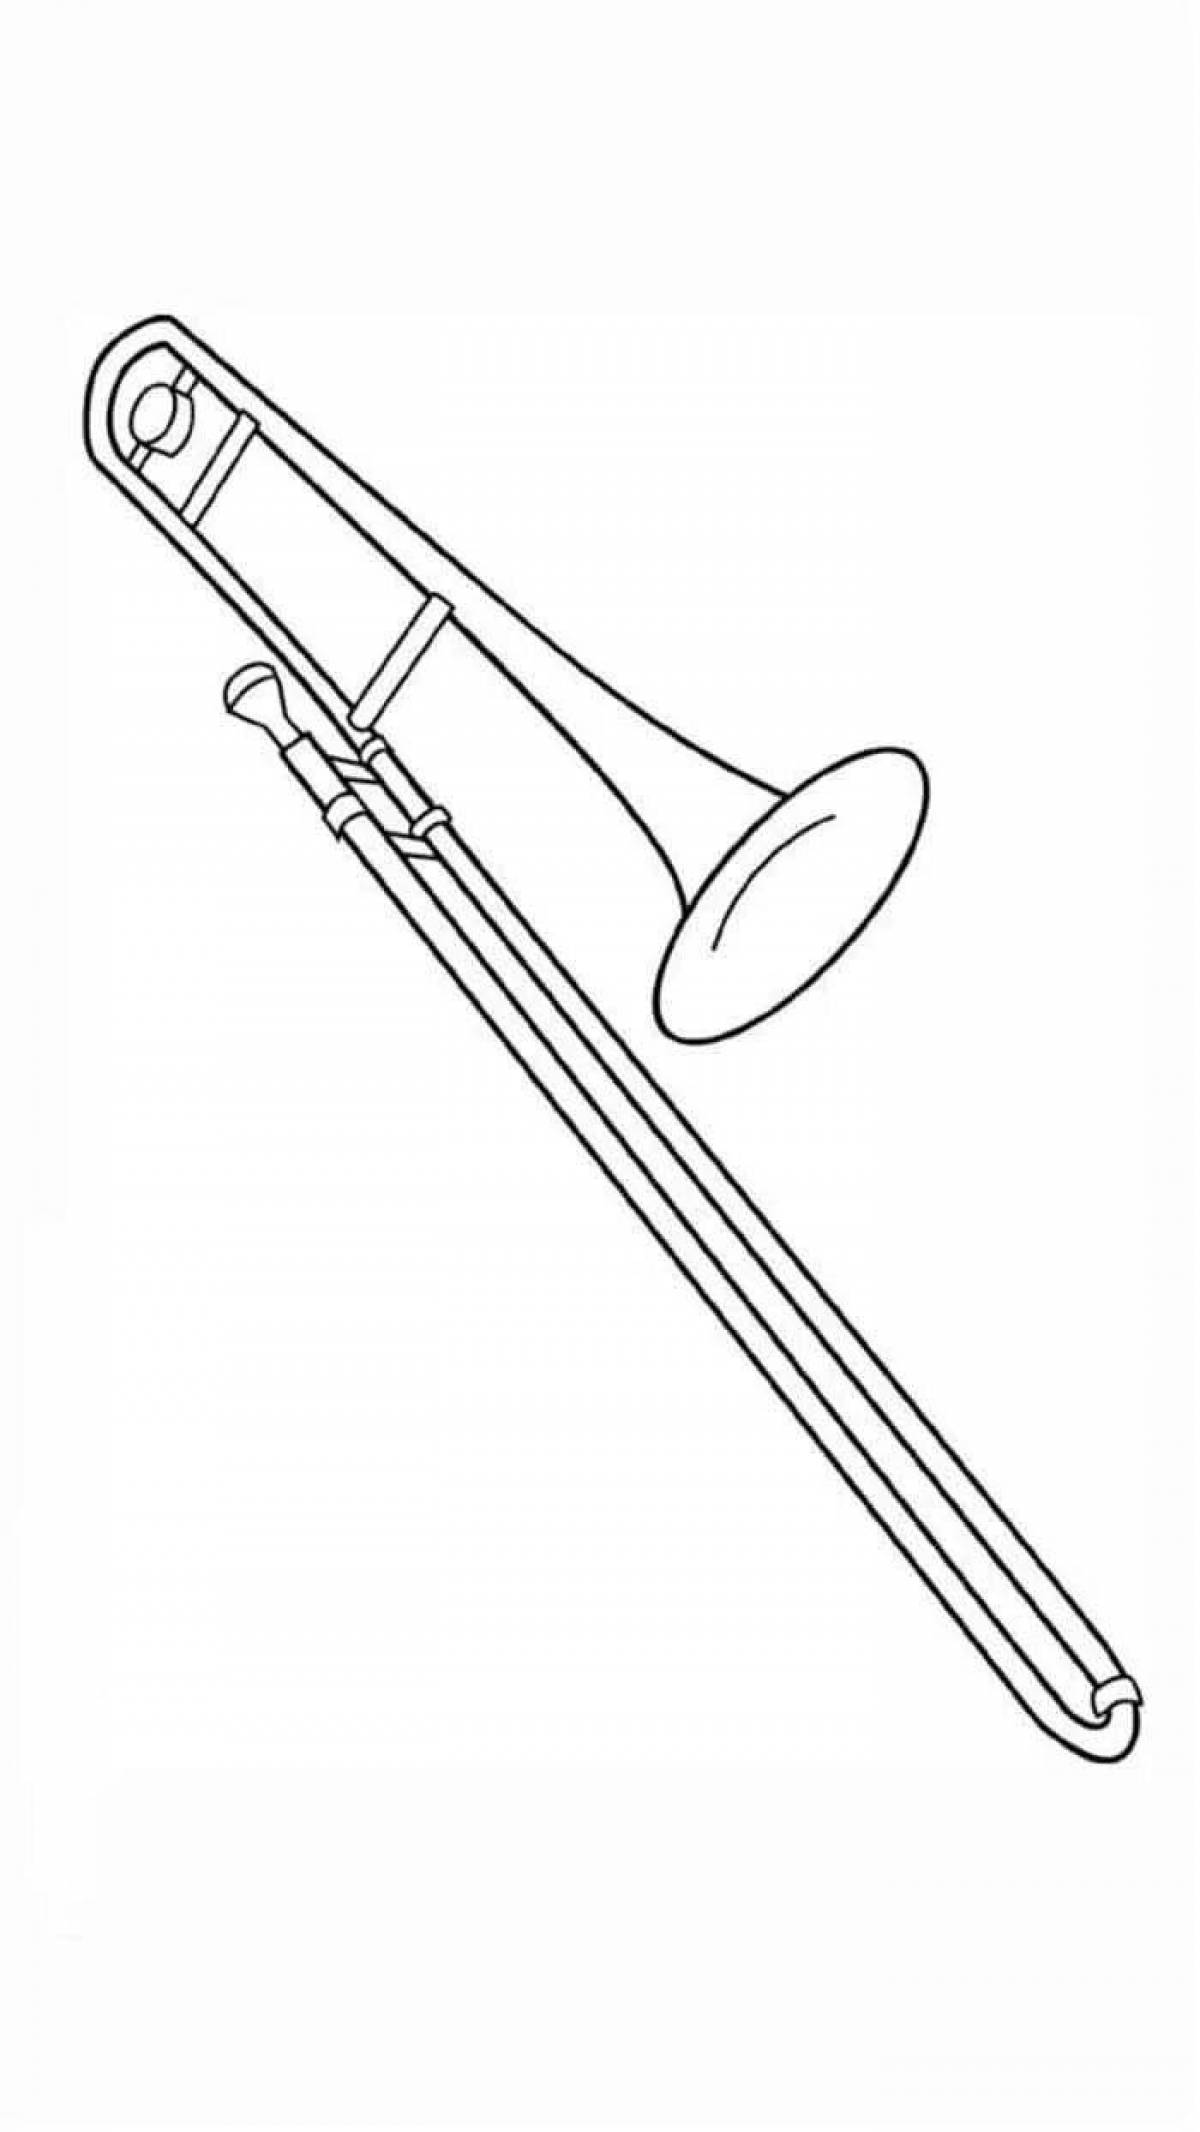 Awesome trumpet coloring pages for preschoolers